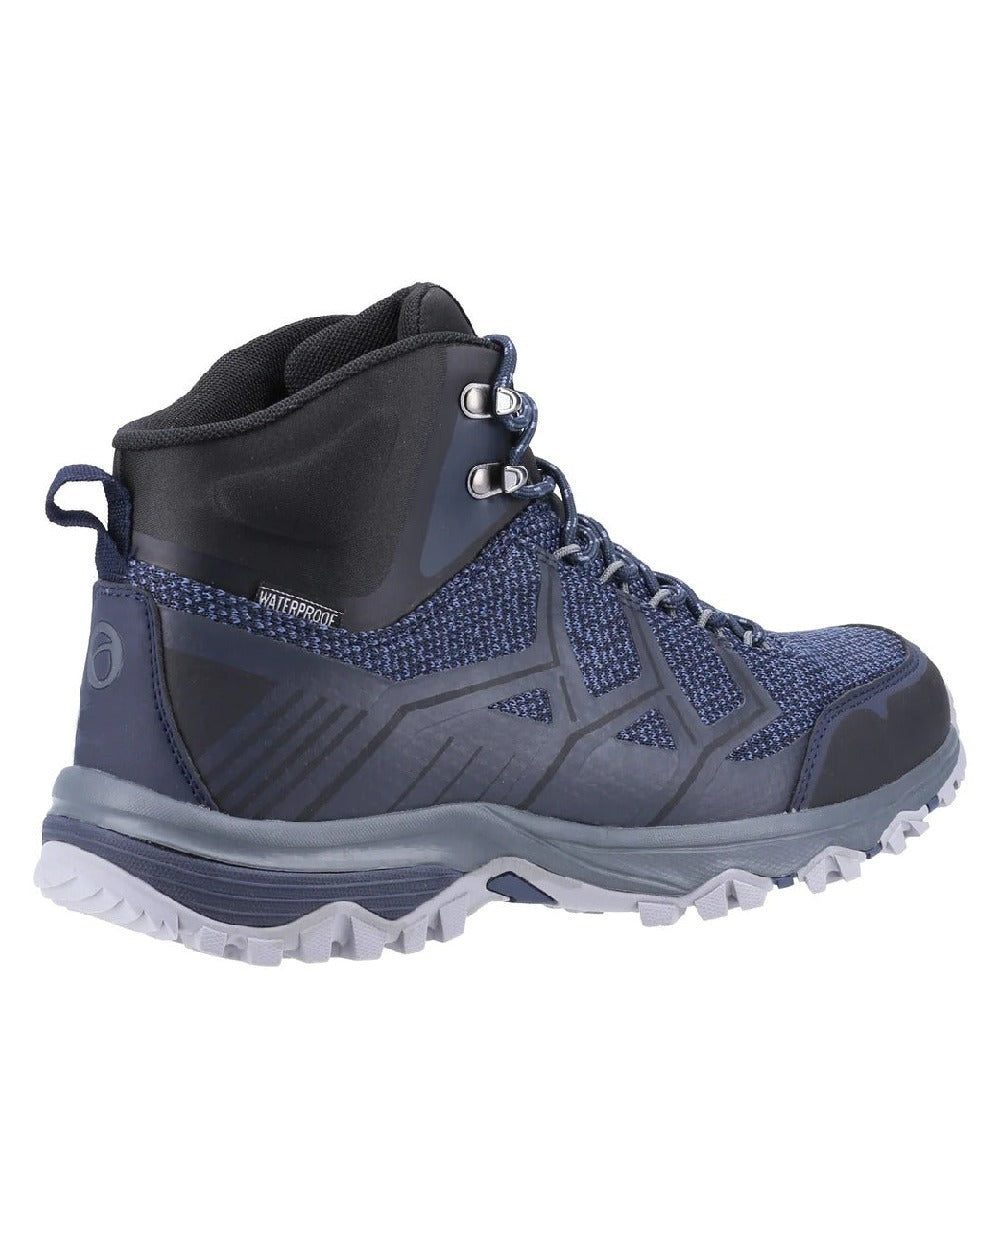 Navy Black coloured Cotswold Mens Wychwood Recycled Hiking Boots on white background 